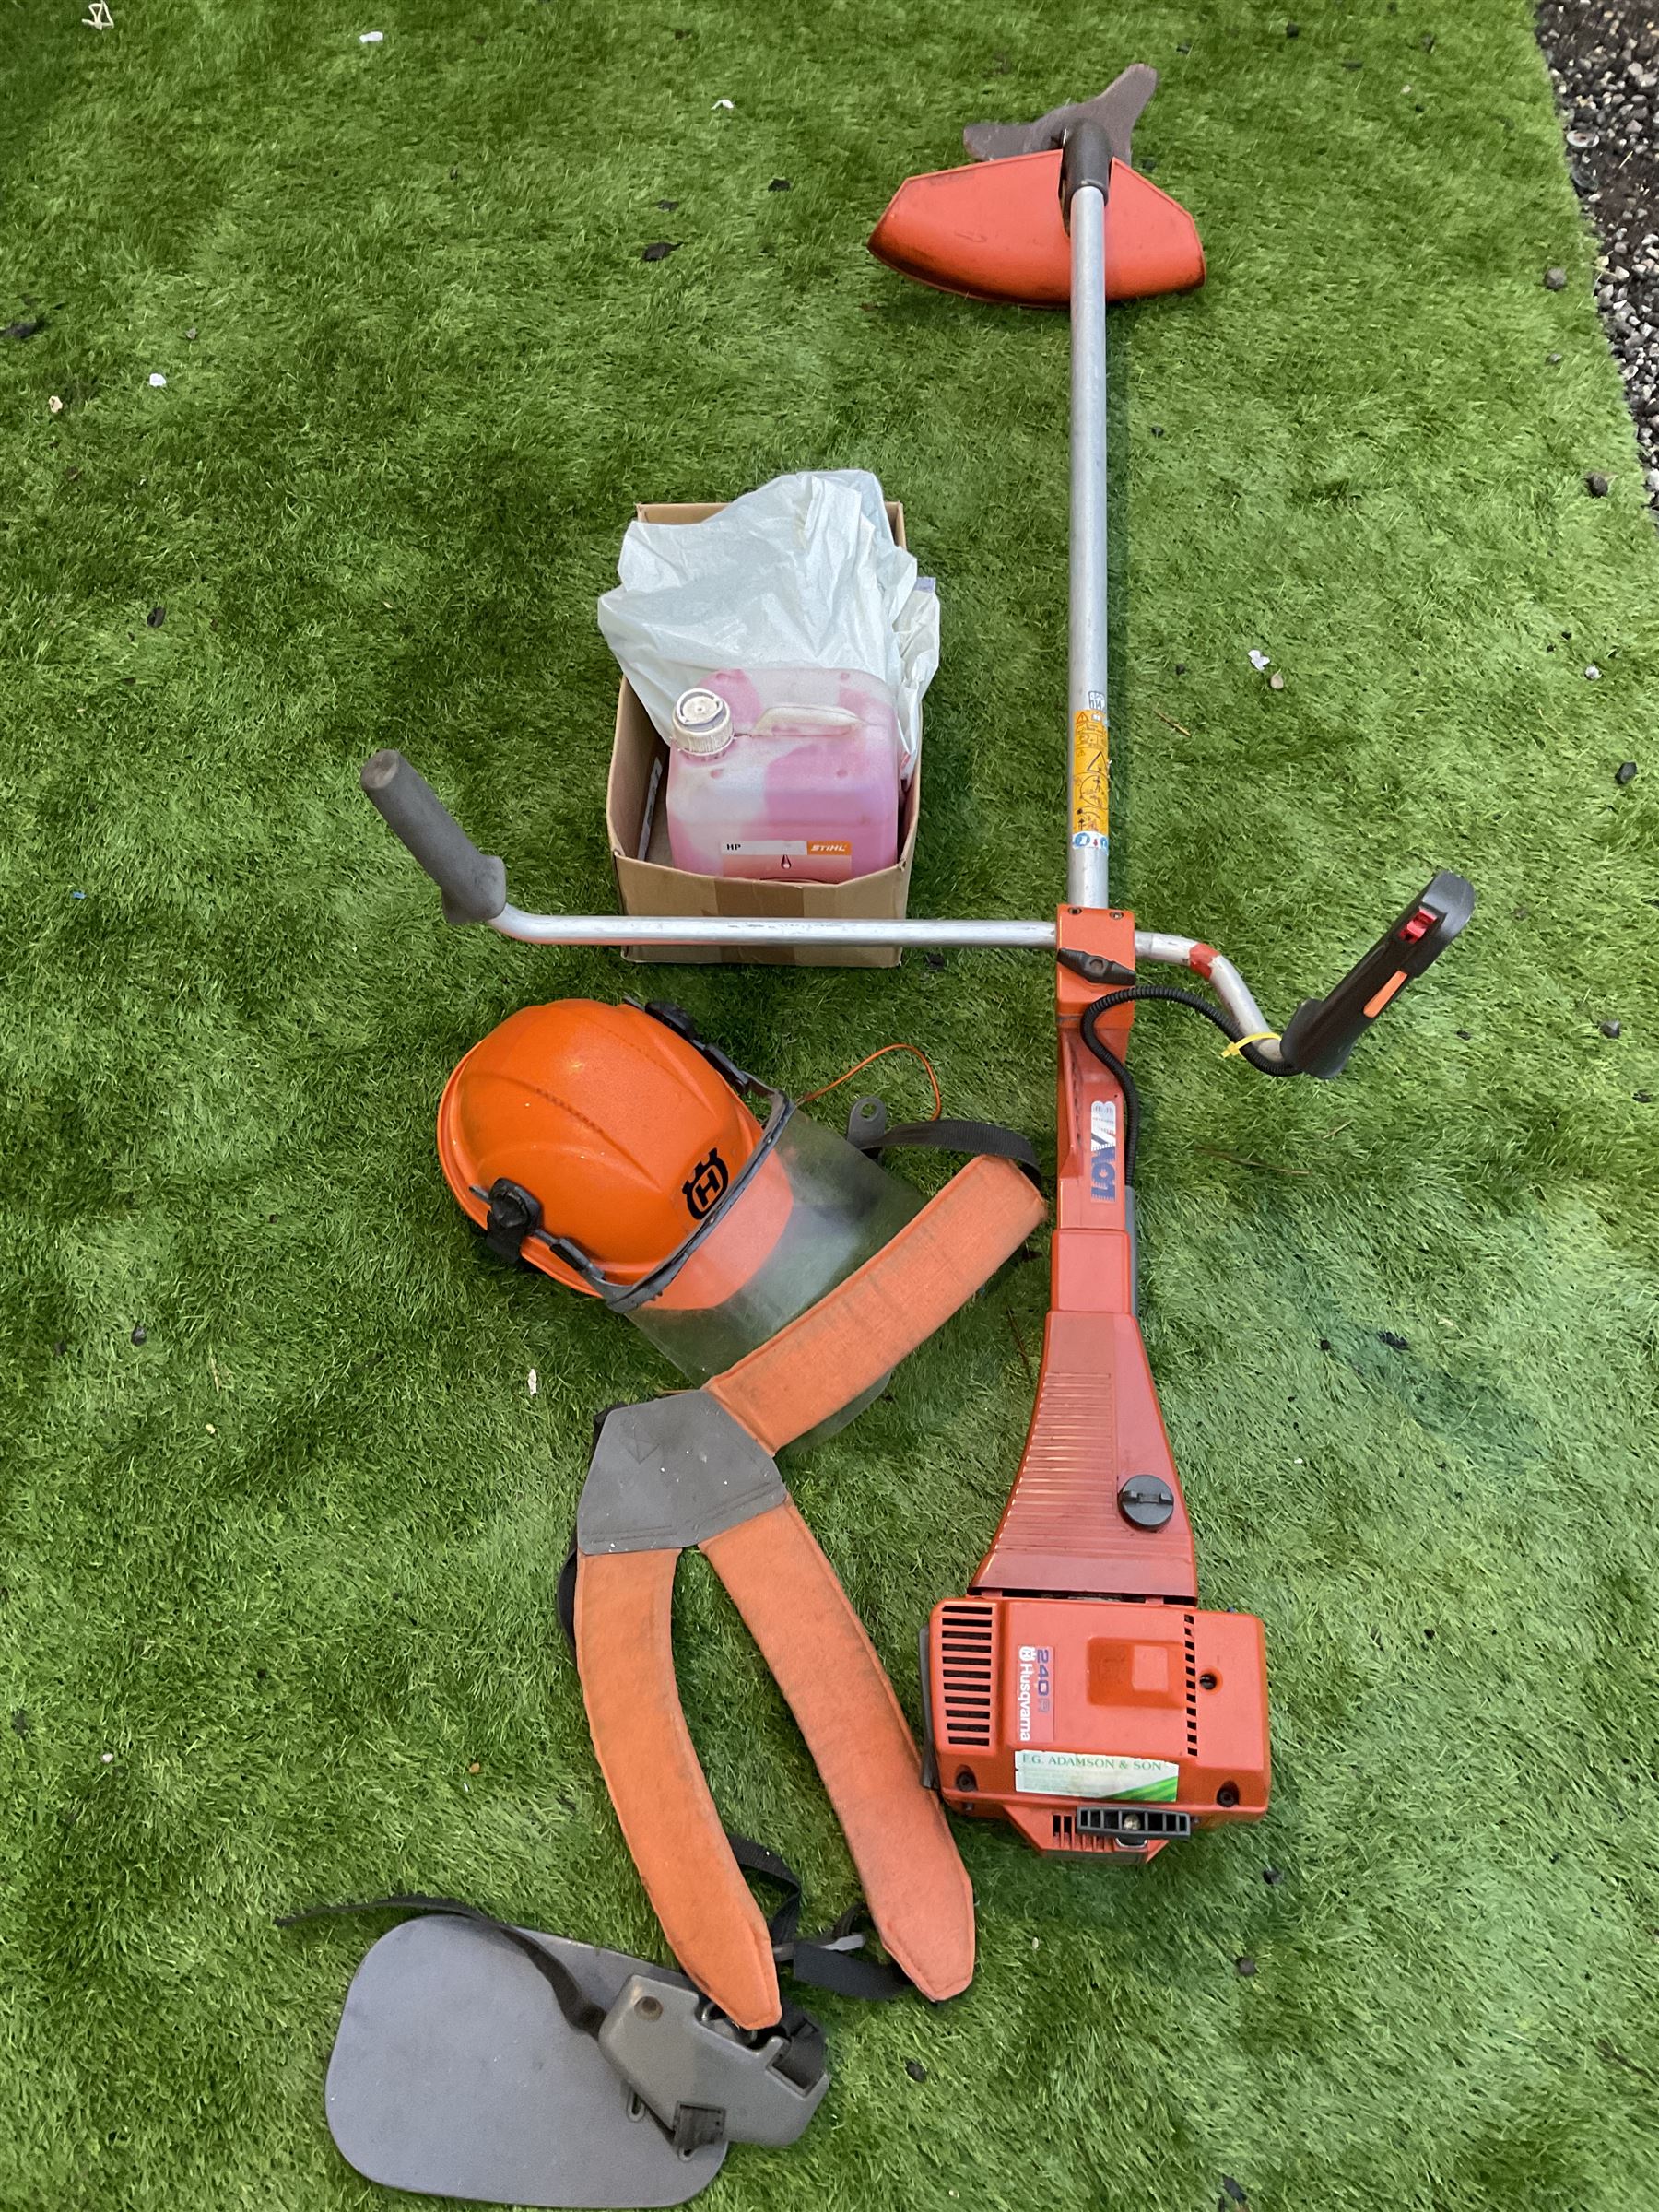 Husqvarna 240 R petrol strimmer with harness and helmet